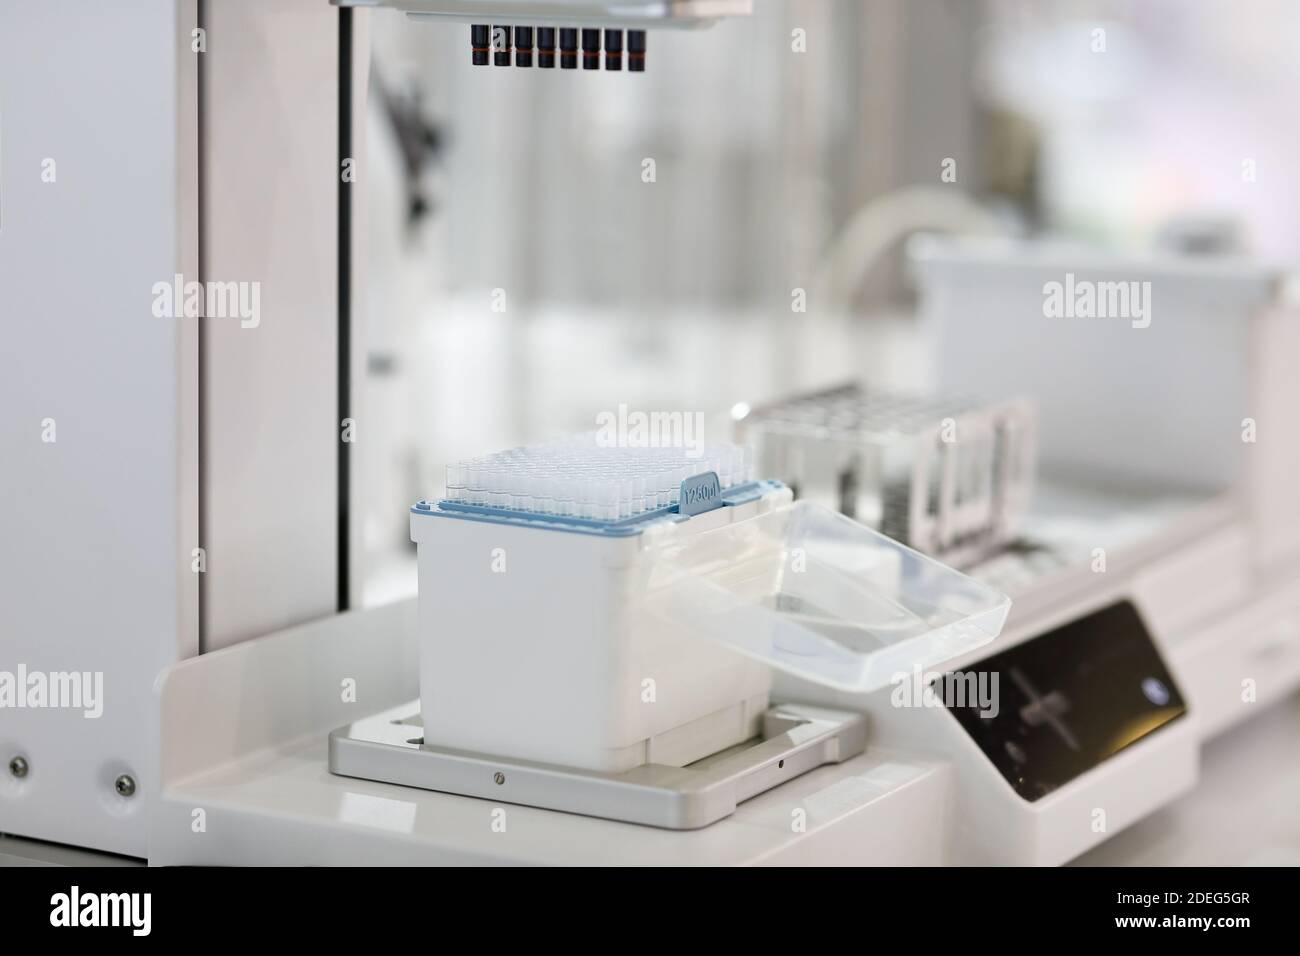 Multichannel pipetting equipment in a laboratory. Selective focus. Stock Photo